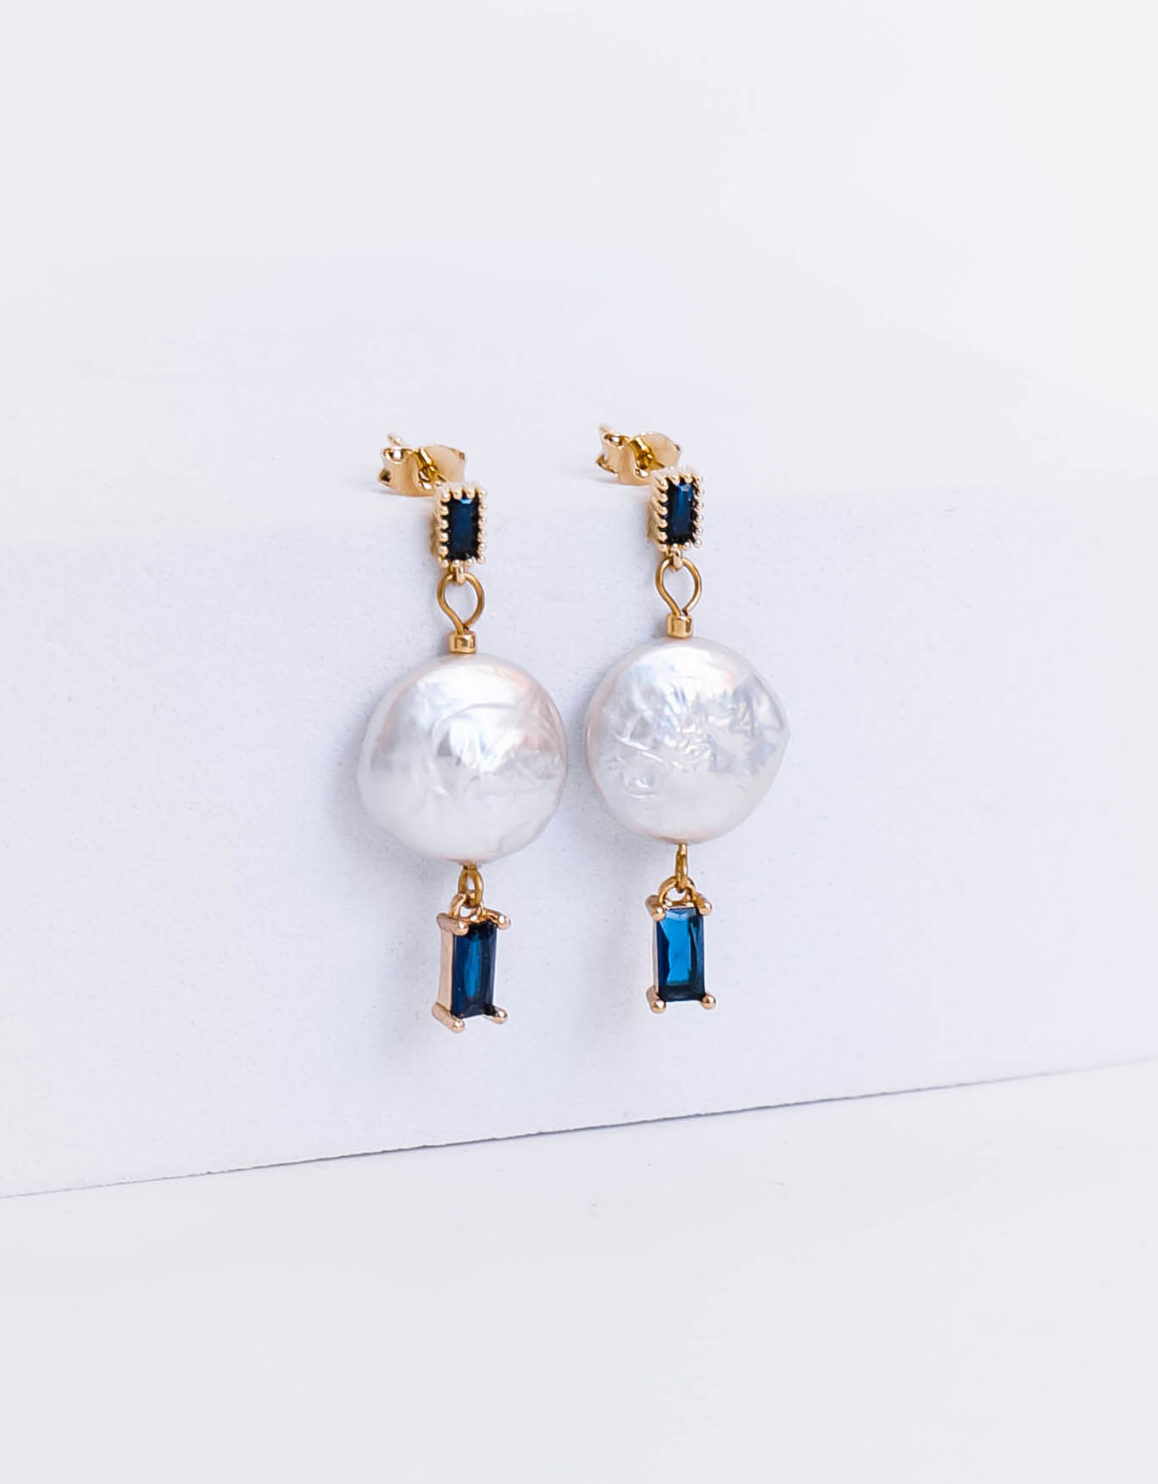 Earrings with Keshi pearls in blue - GG UNIQUE